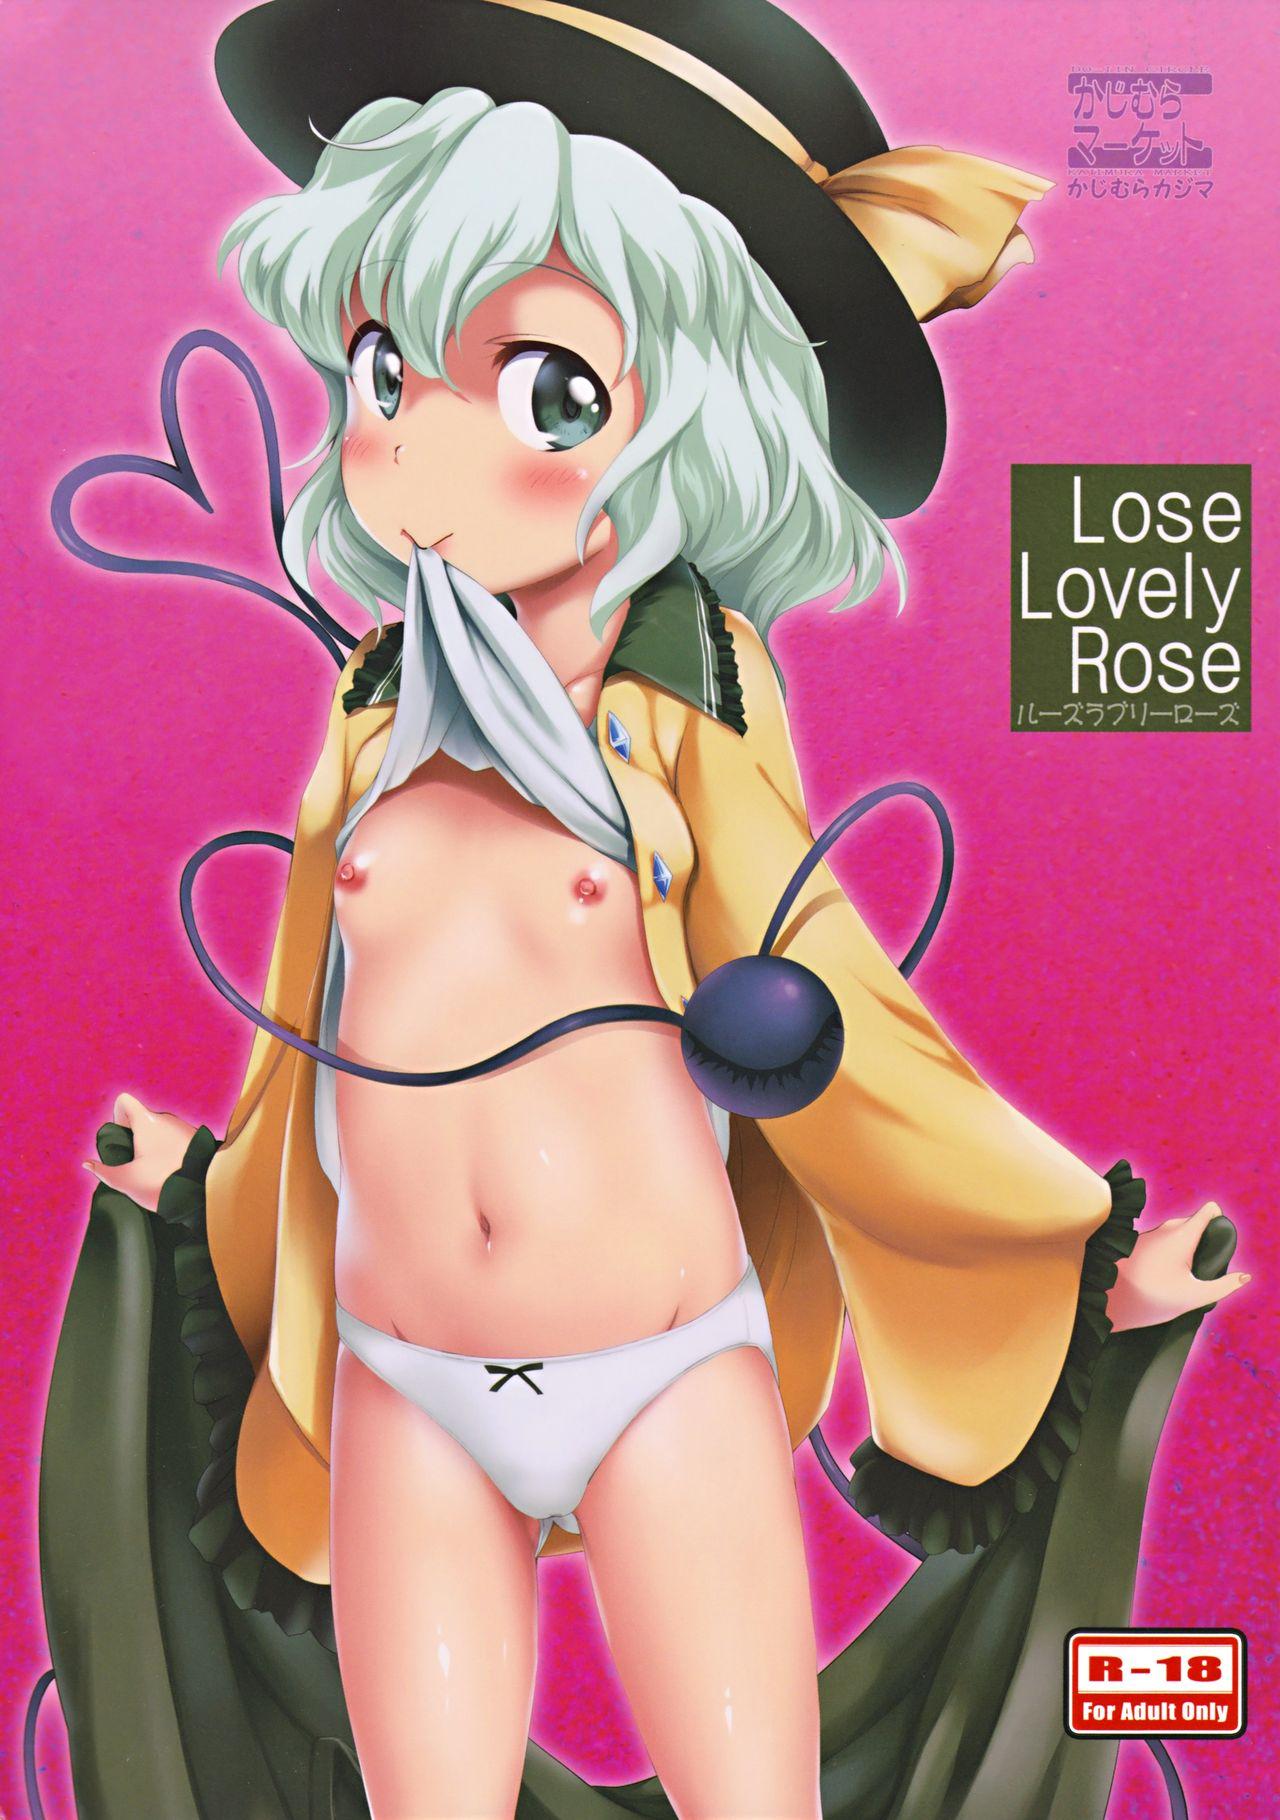 Onlyfans Lose Lovely Rose - Touhou project Gangbang - Page 2